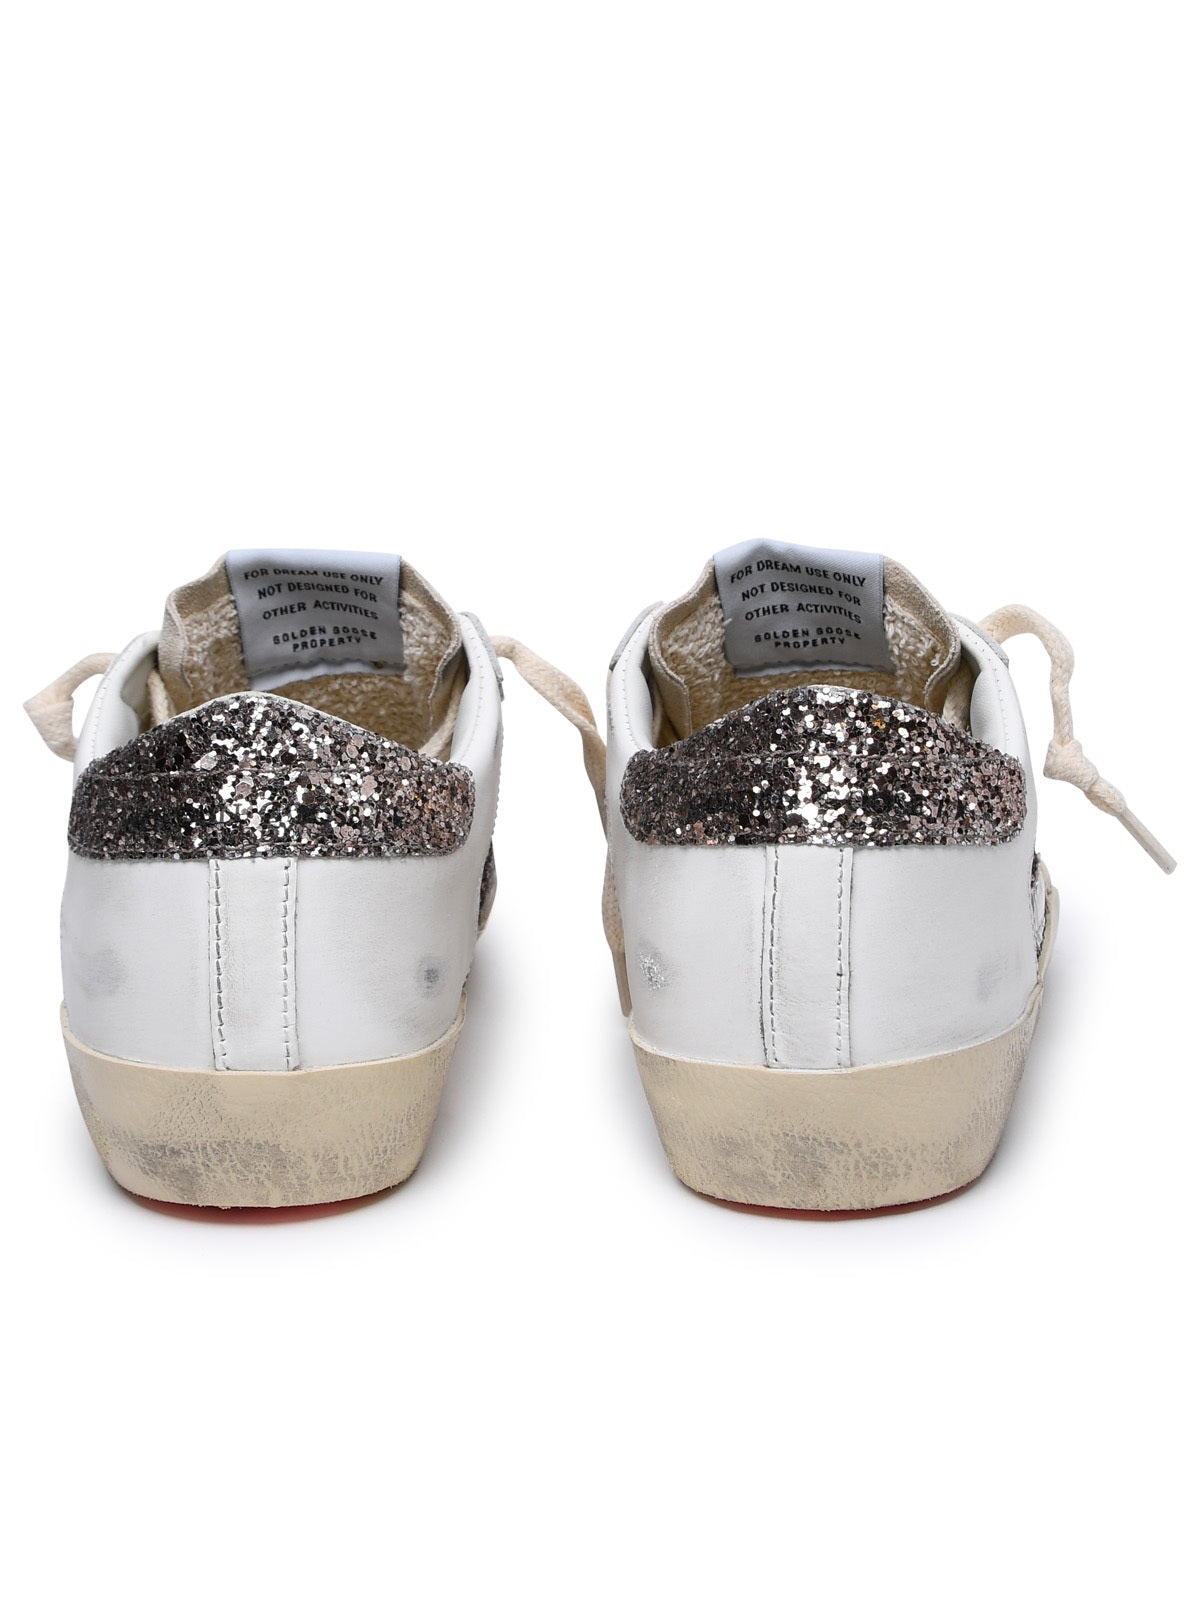 Golden Goose Woman Golden Goose 'Super-Star' White Leather Sneakers - 4